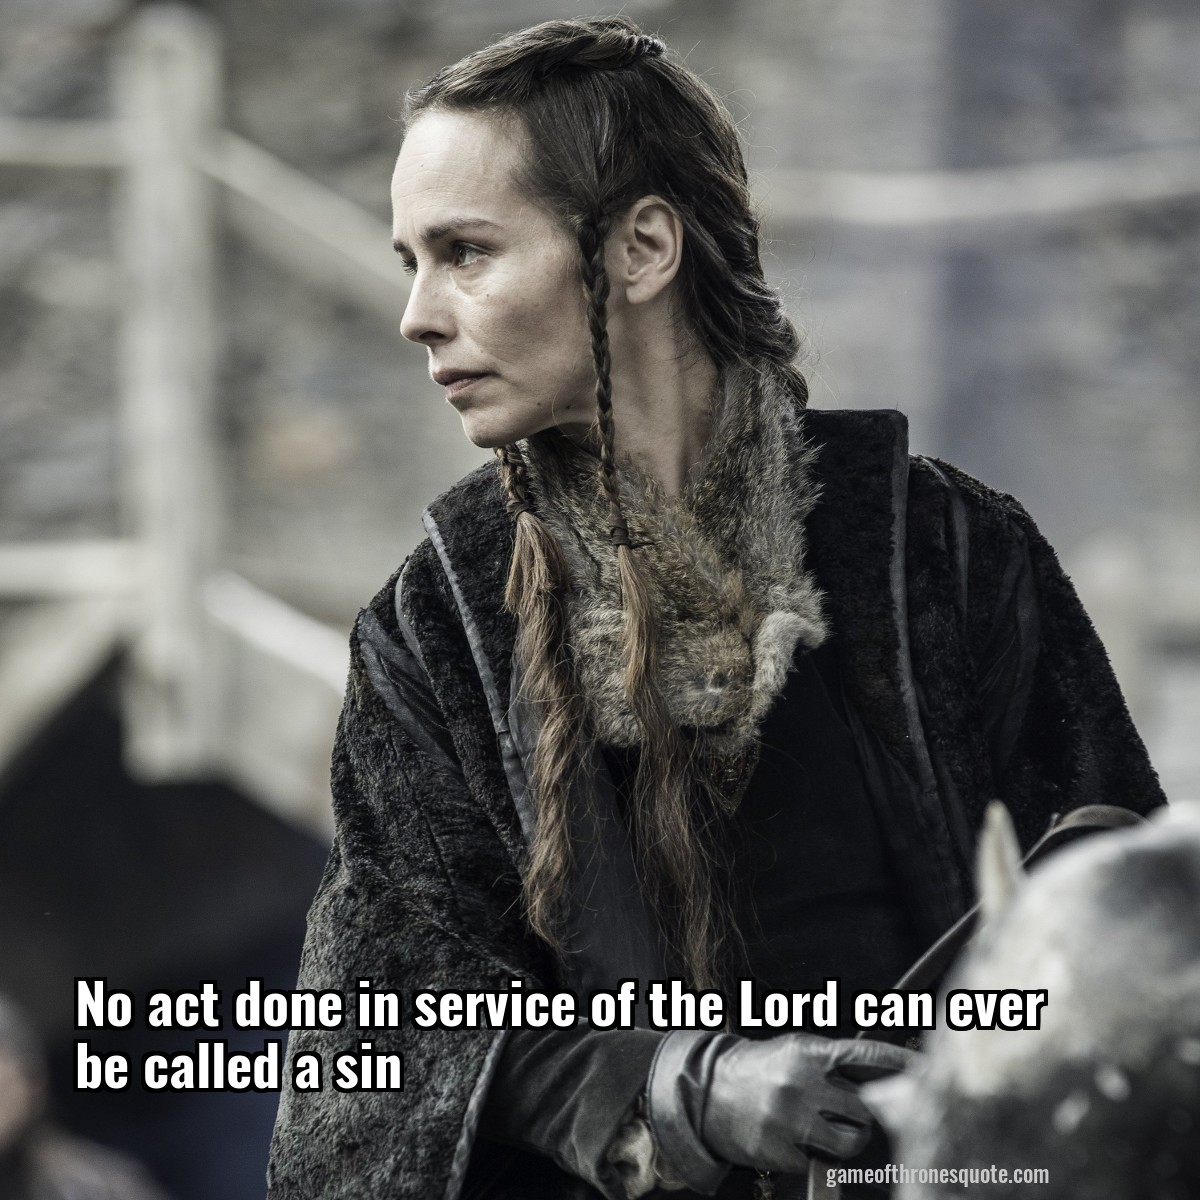 No act done in service of the Lord can ever be called a sin